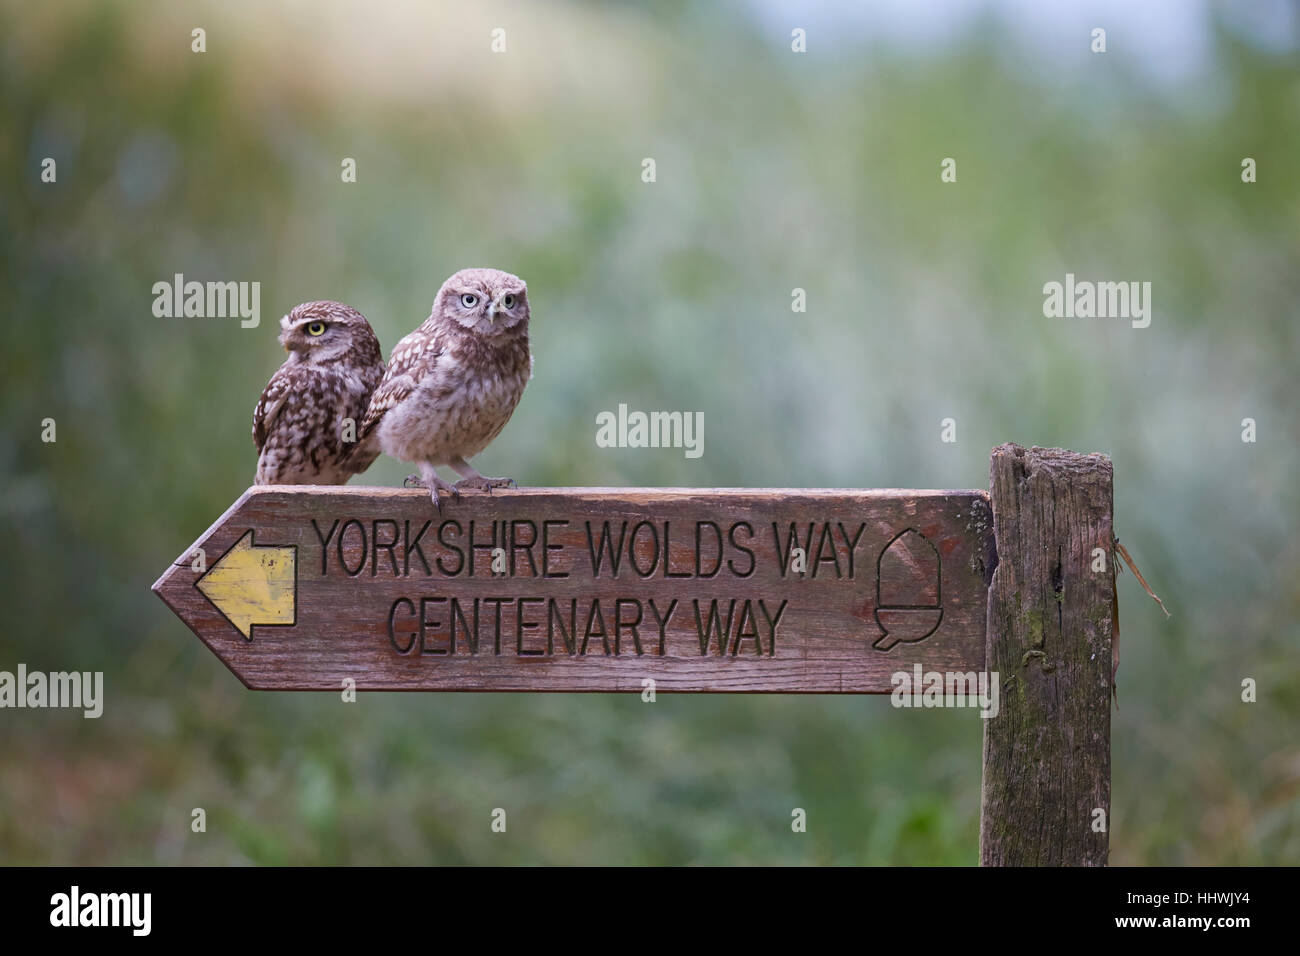 Two Little Owls, Athene noctua, one an owlet perched on a Yorkshire Wolds Way Centenary Way wooden sign post, East Yorkshire, Stock Photo